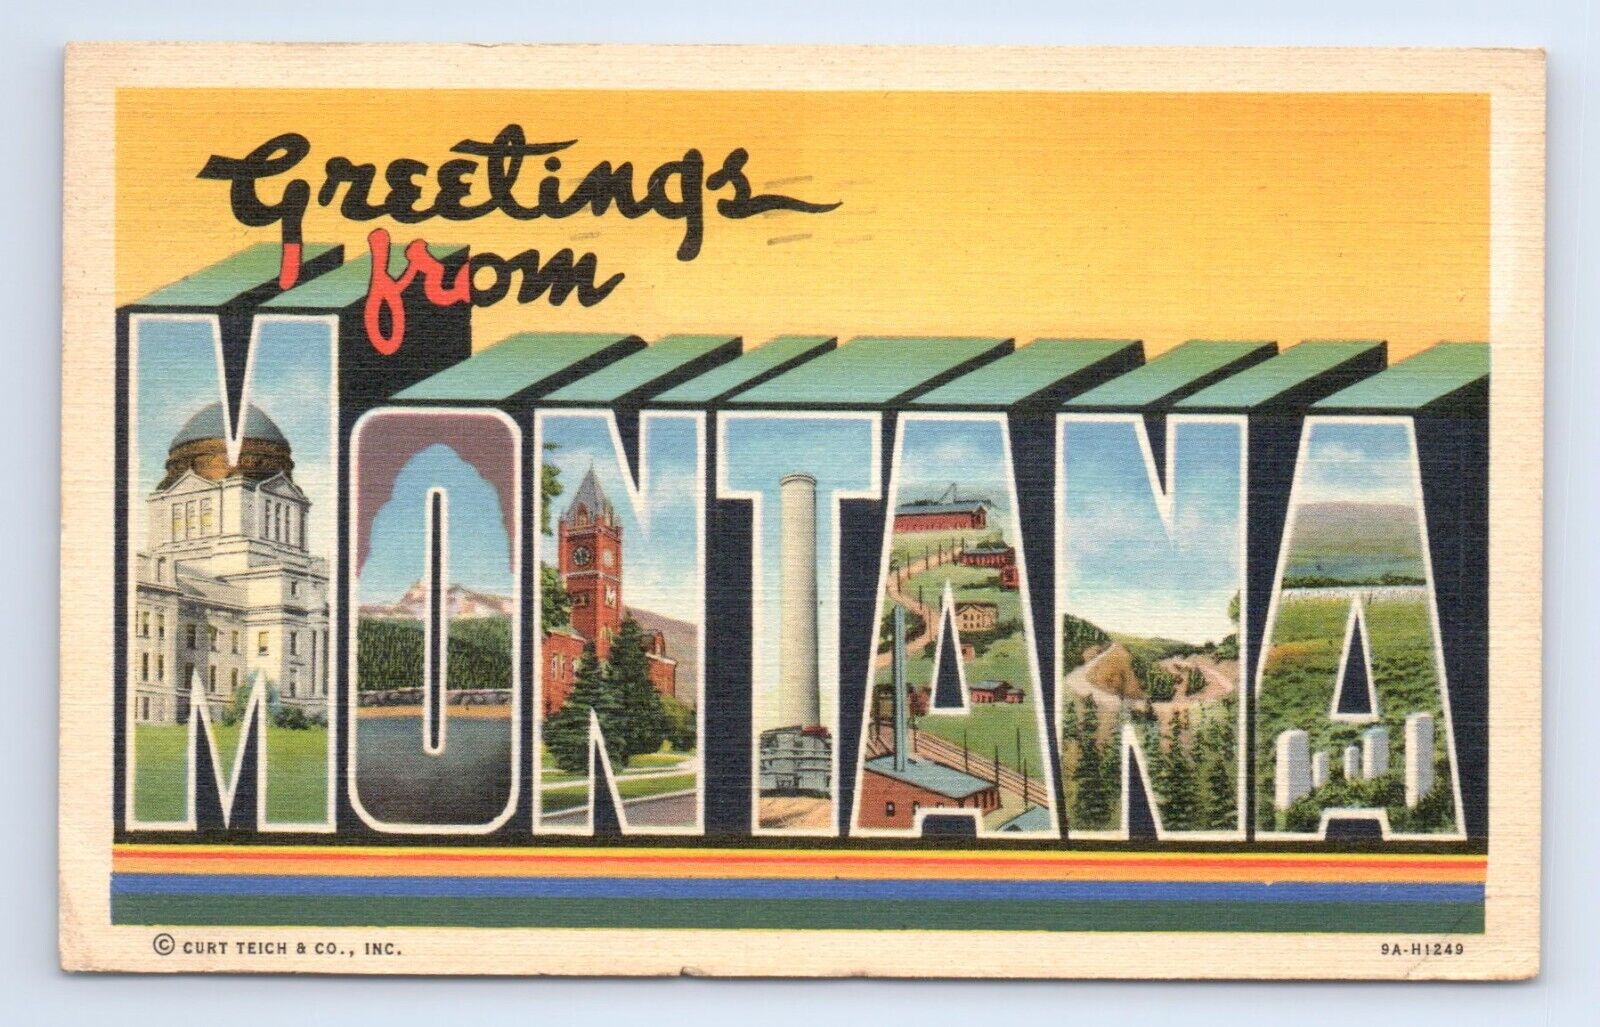 Large Letter Greetings from Montana Curt Teich Postcard VTG MT Linen Multiview